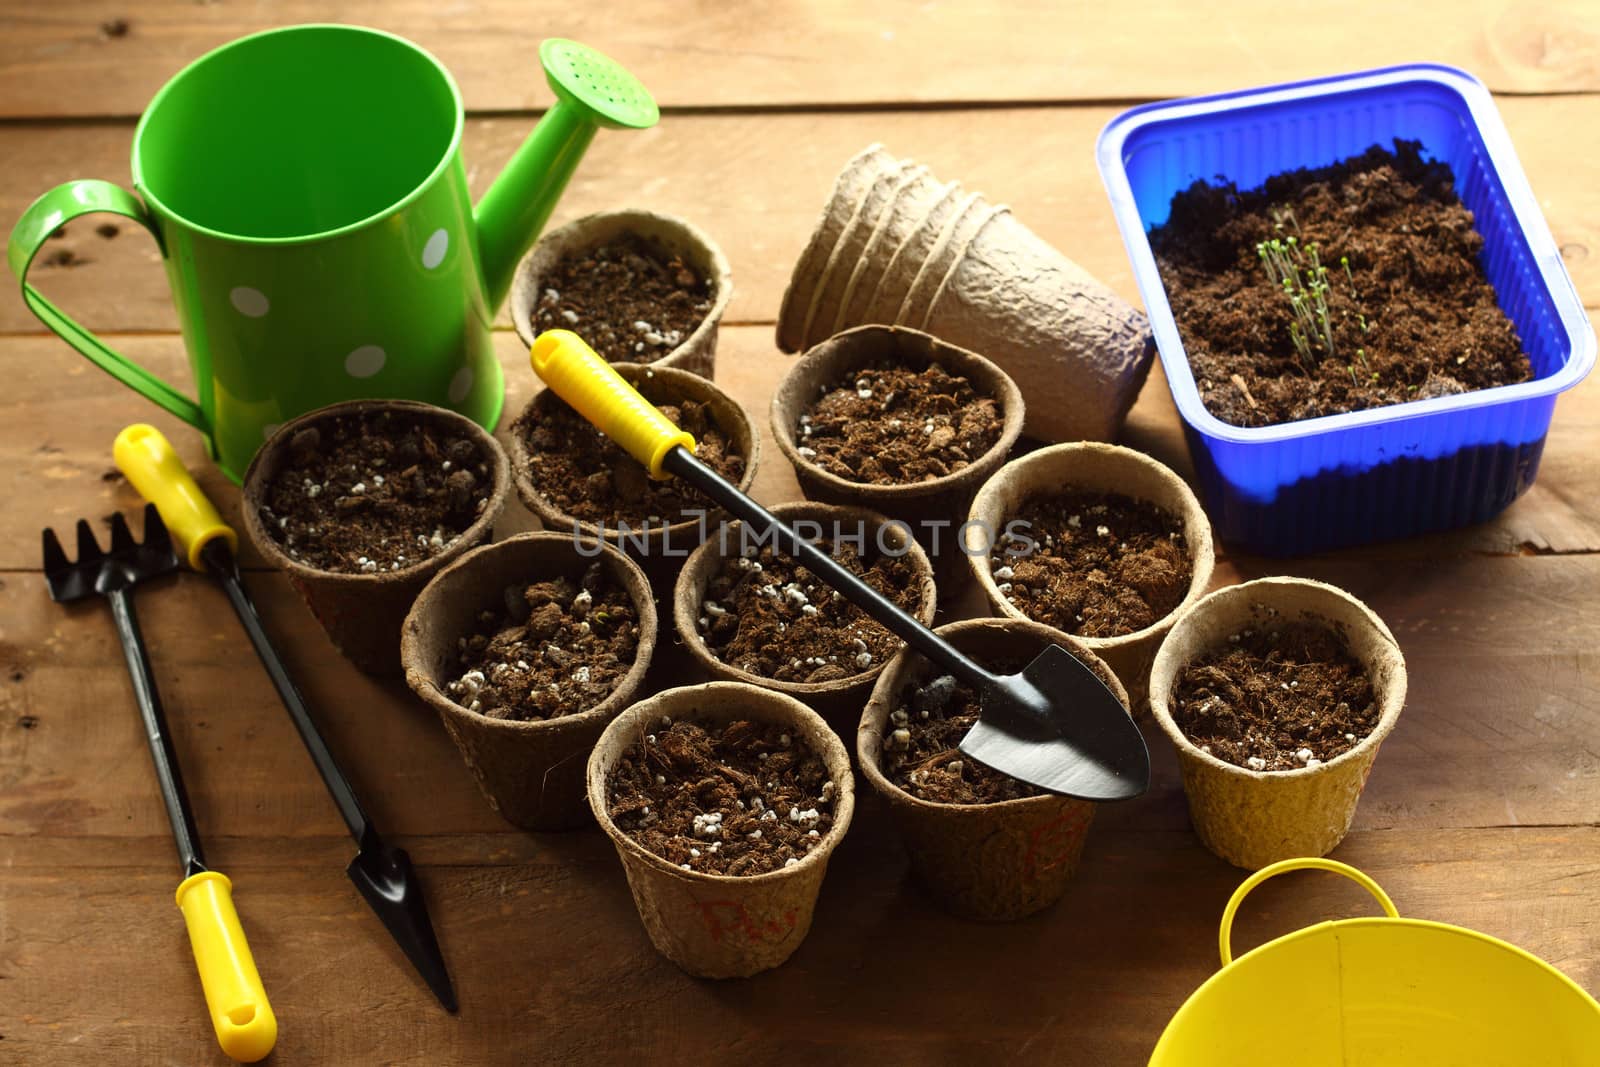 preparation for planting- watering can, pots, garden tools